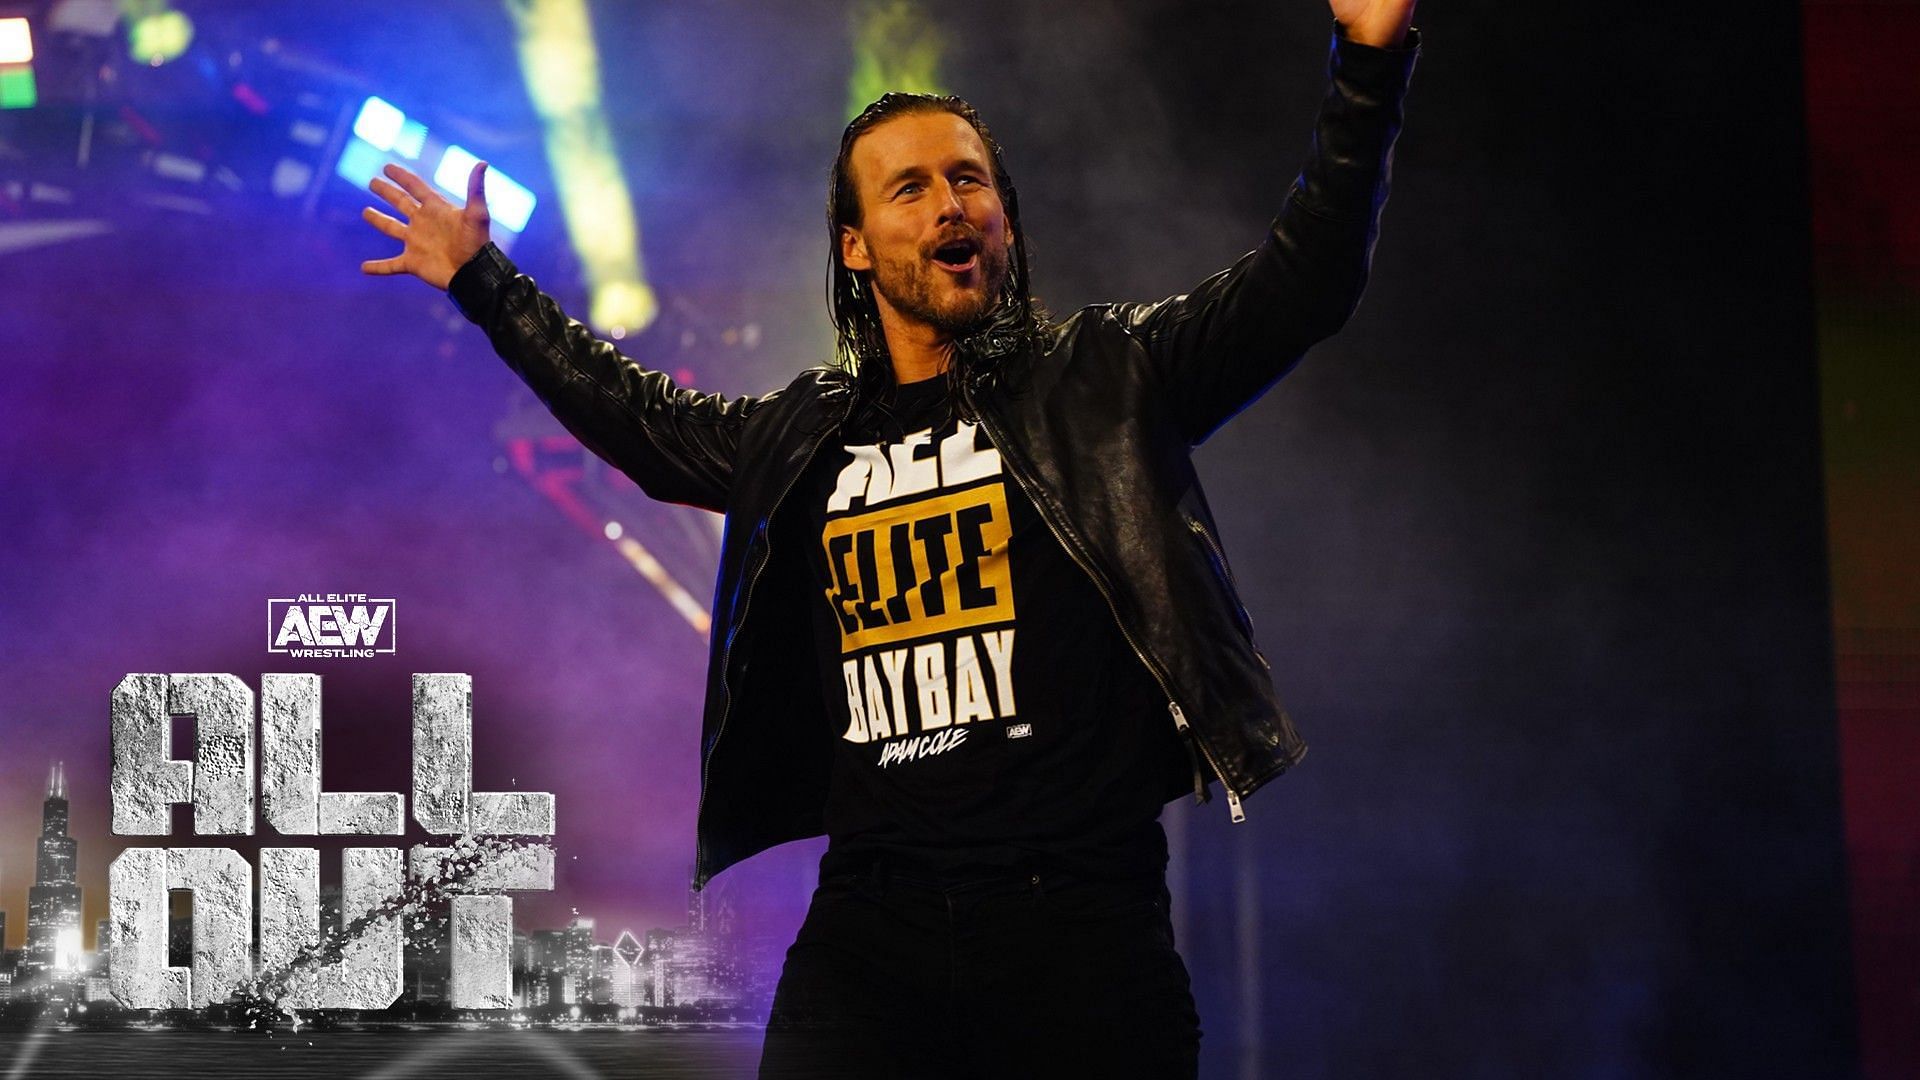 Adam Cole credited AEW and NXT fans